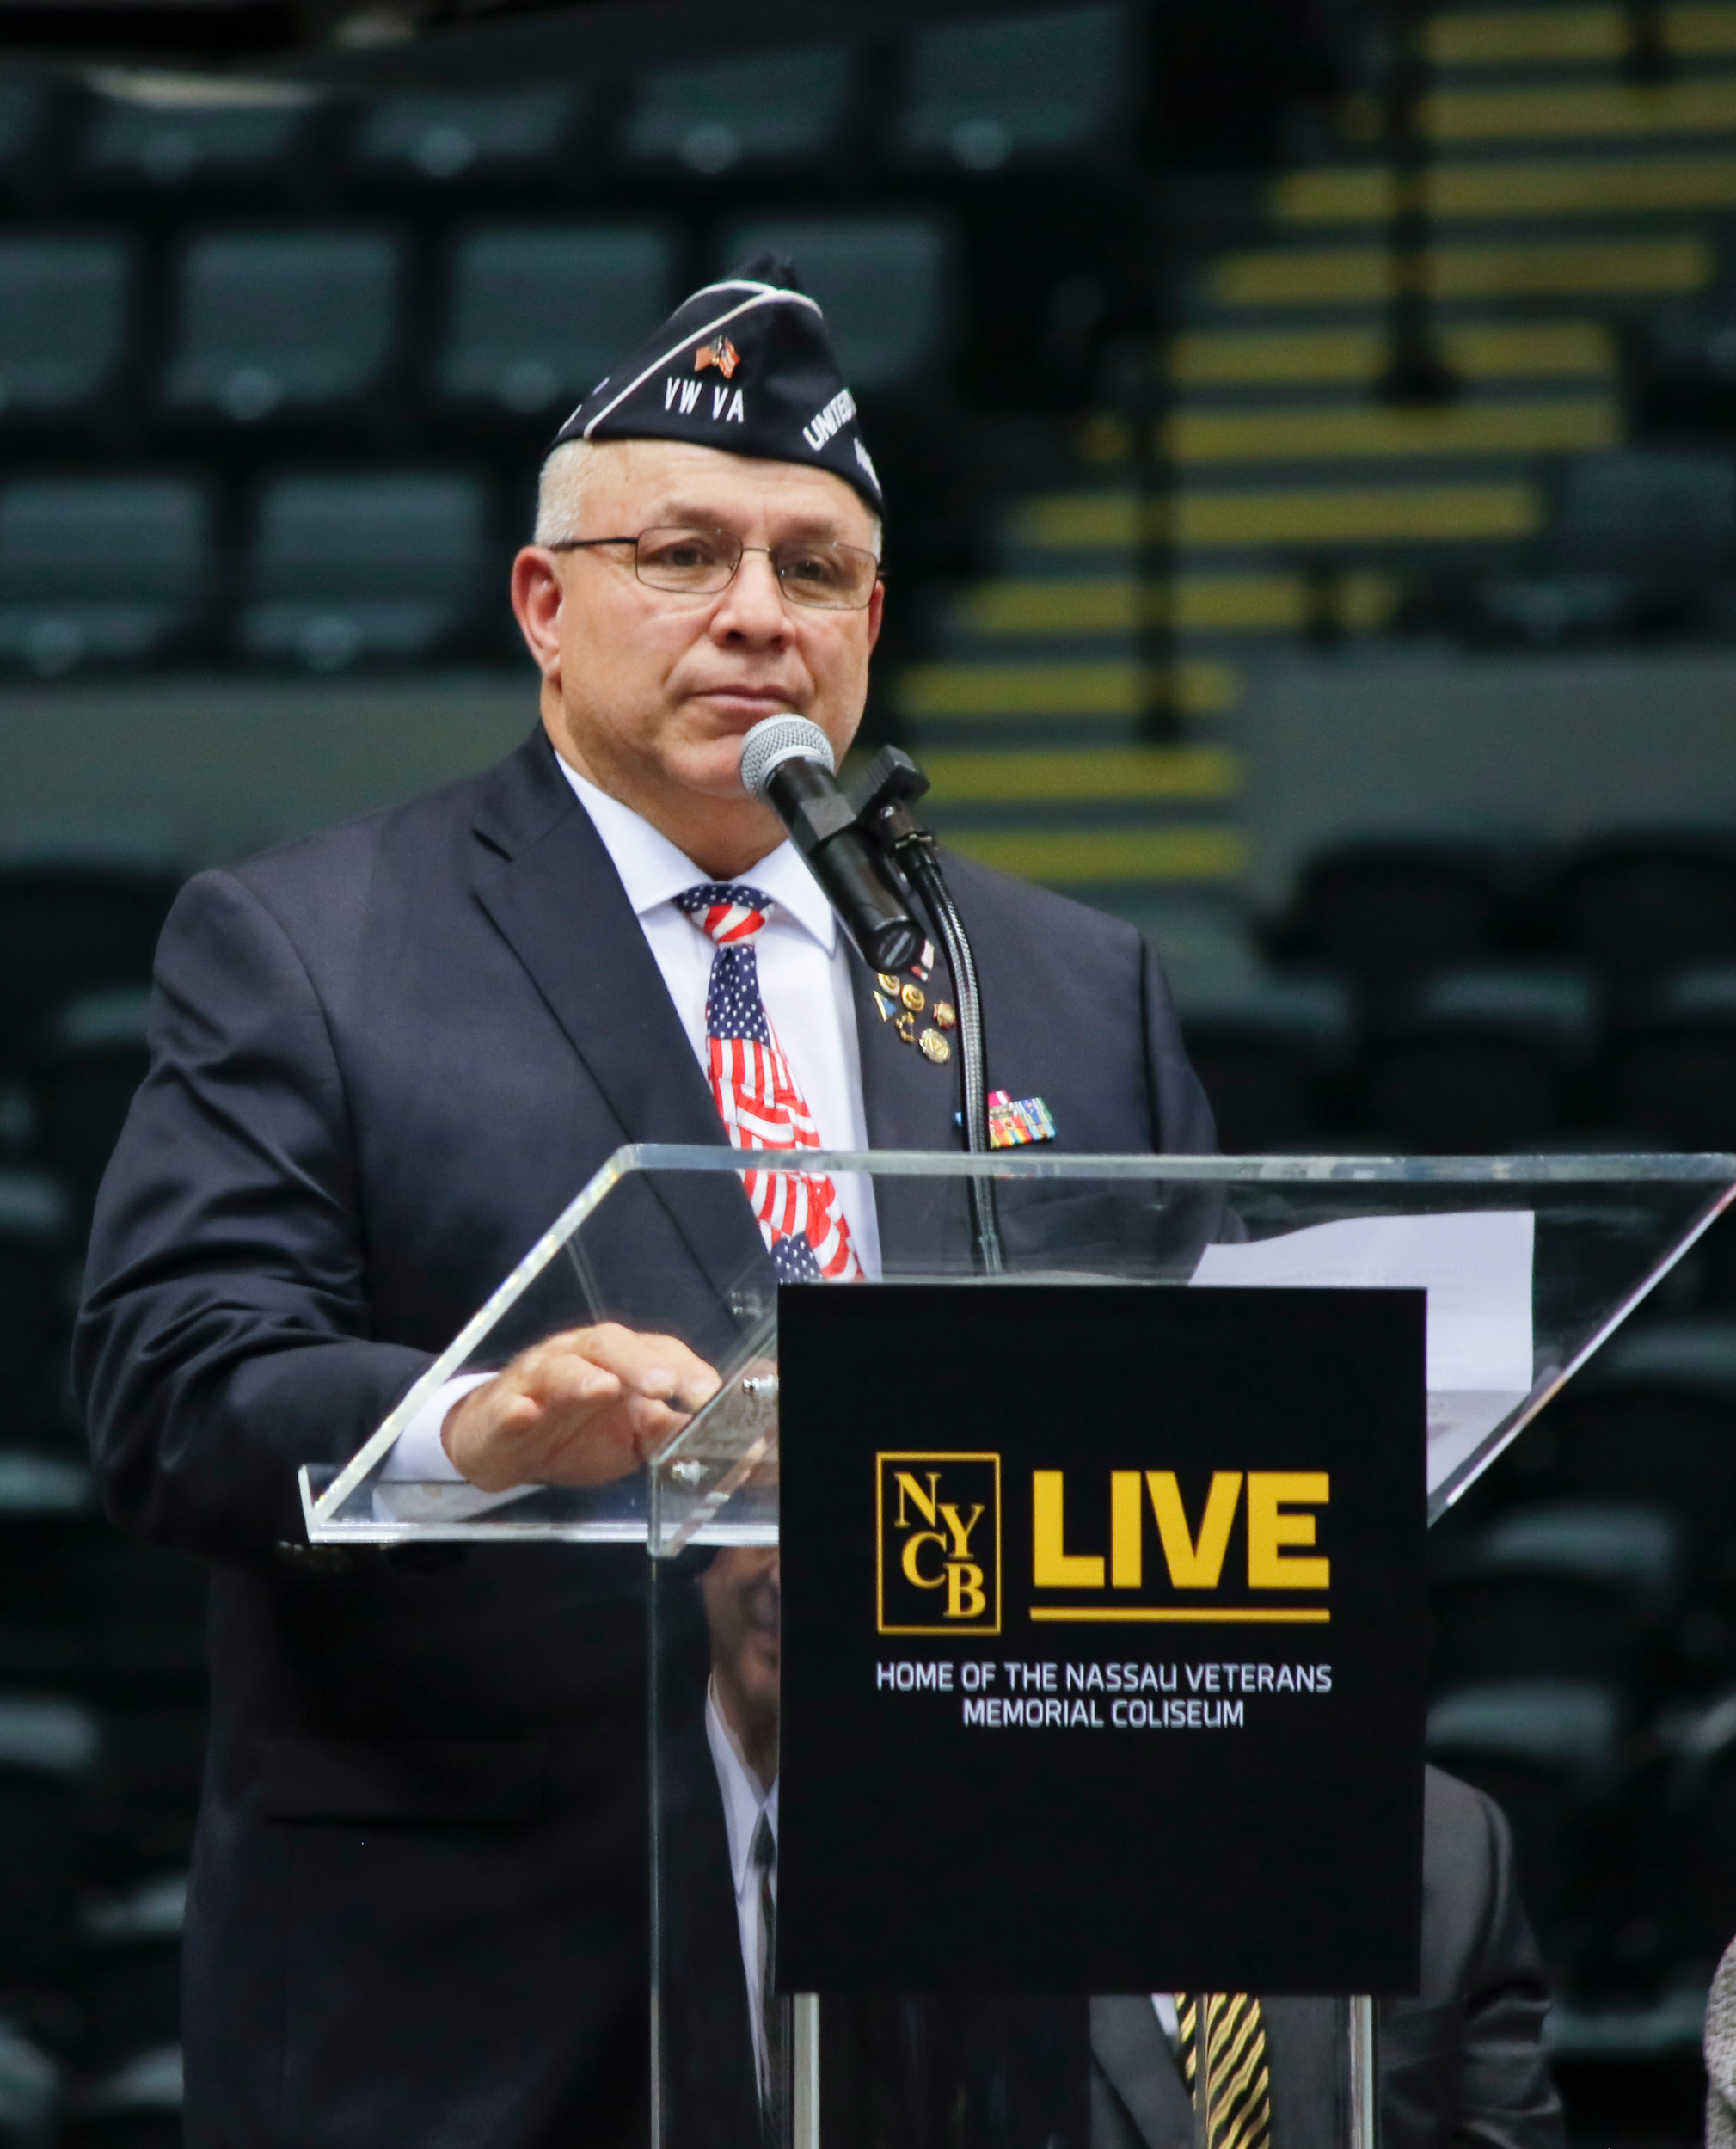 Frank Colon spoke about the new veterans memorial for the venue, which kept the name Nassau Veterans Memorial Coliseum, and recognized the veterans who were in attendance. The new coliseum has 8 seats that will always remain empty during every event in honor of those who have given the ultimate sacrifice. POW, MIA, all brances of the military, first responders and those who lost their lives in 9-11. These seats are marked with a special emblem.